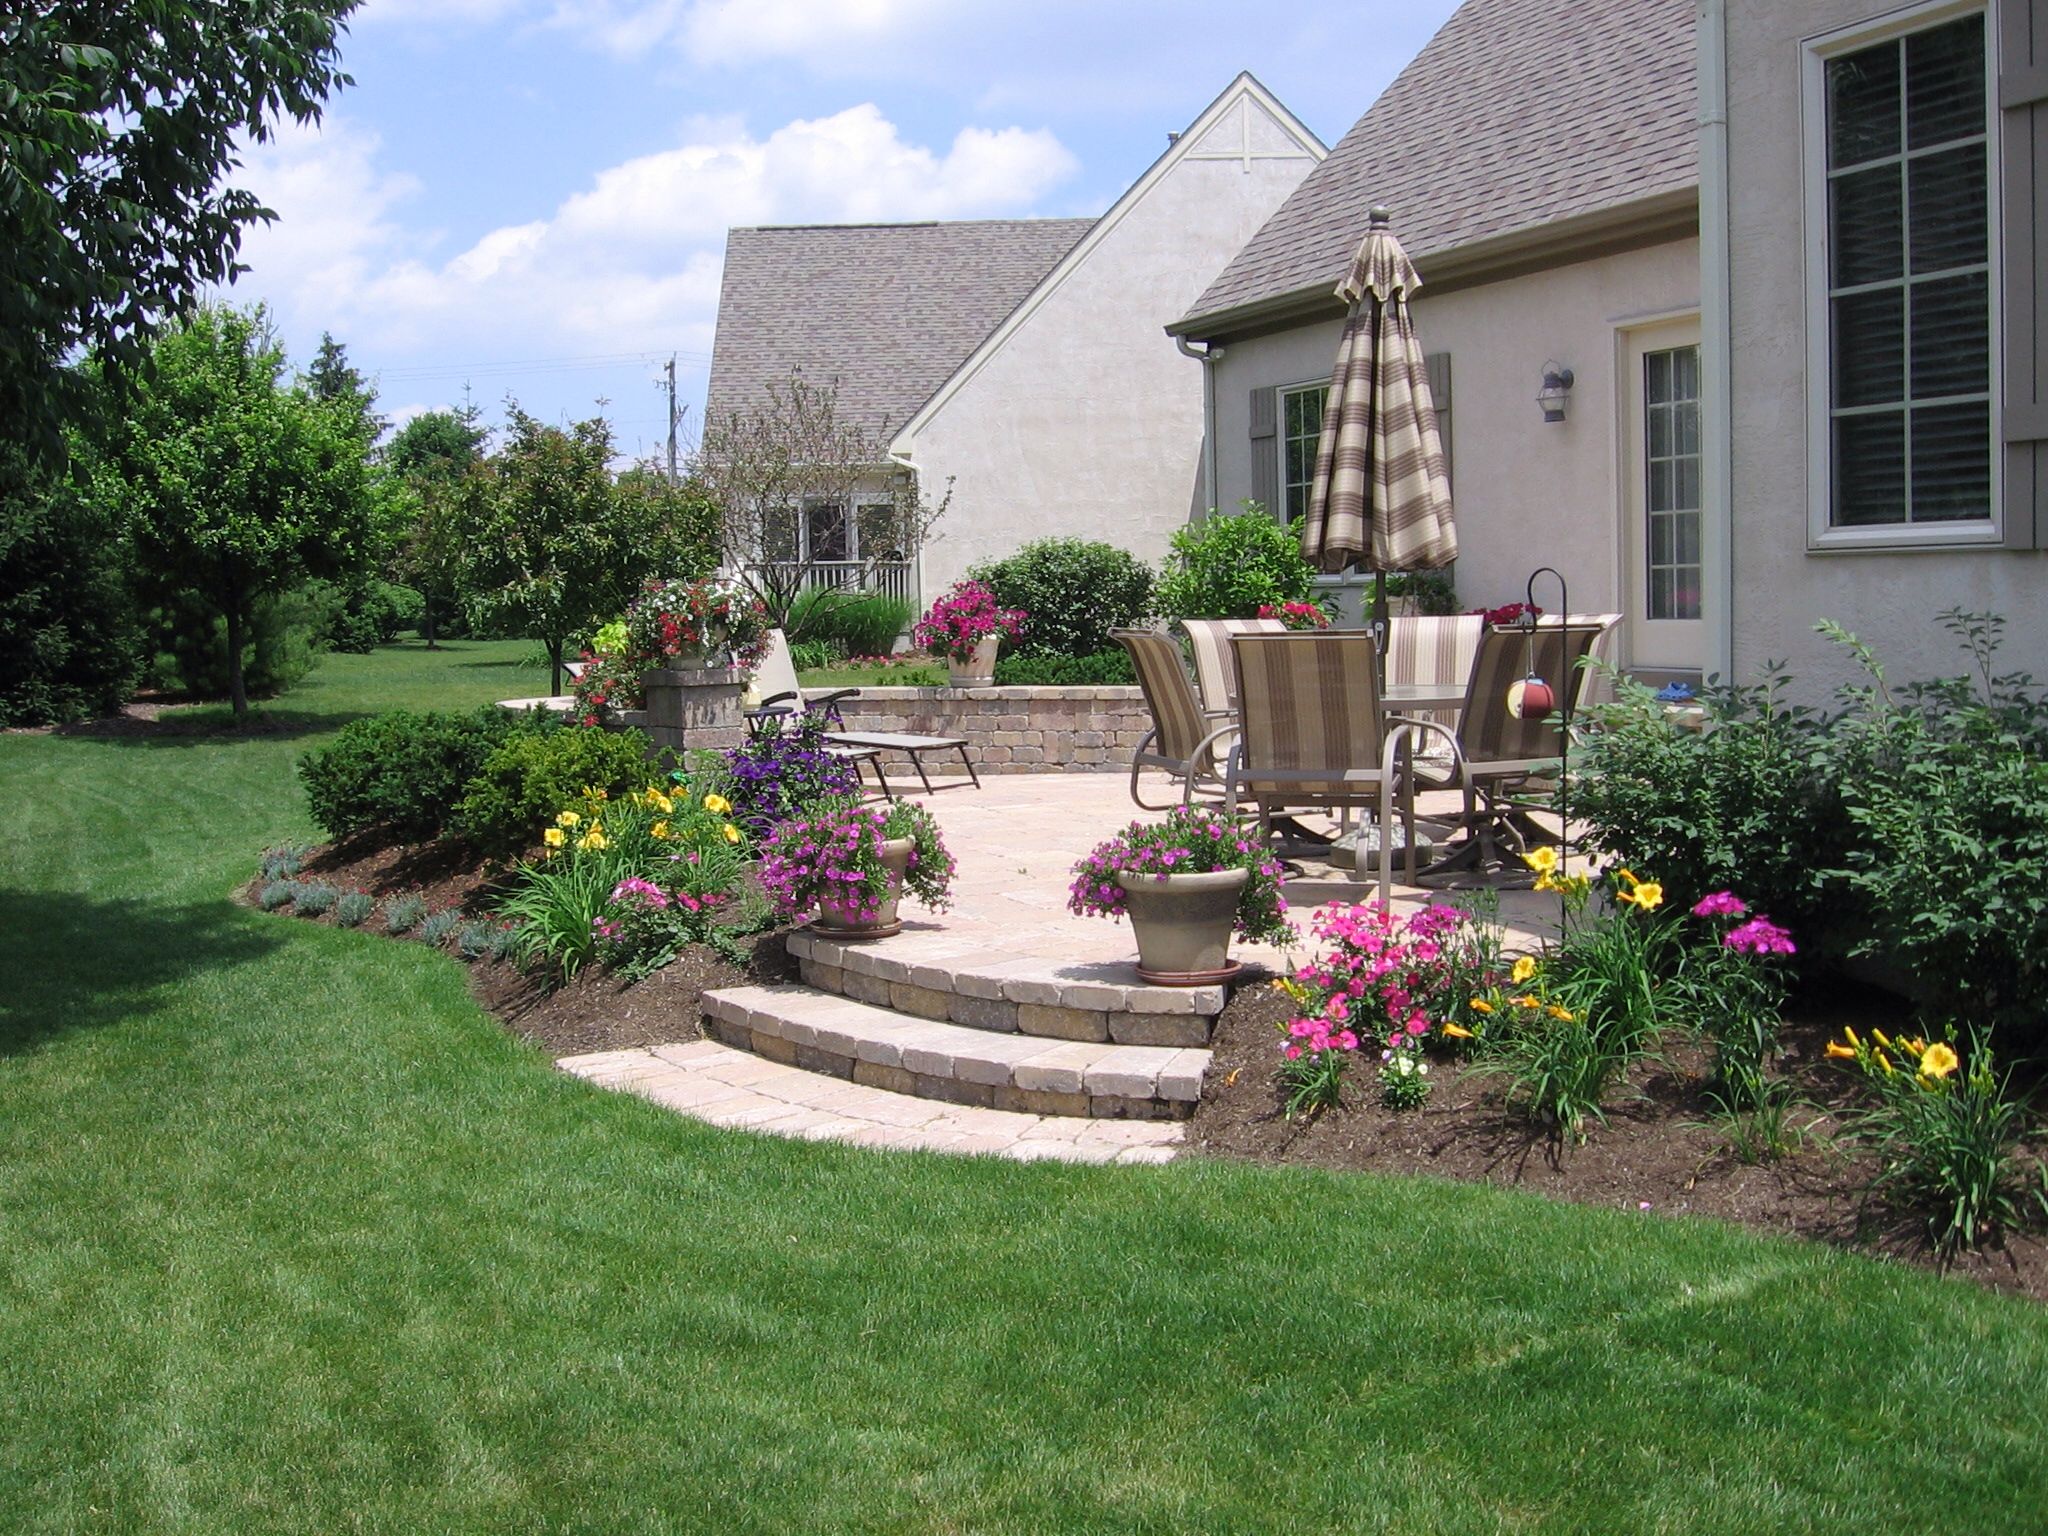 Landscaping around patio | Landscaping around patio, Patio landscaping